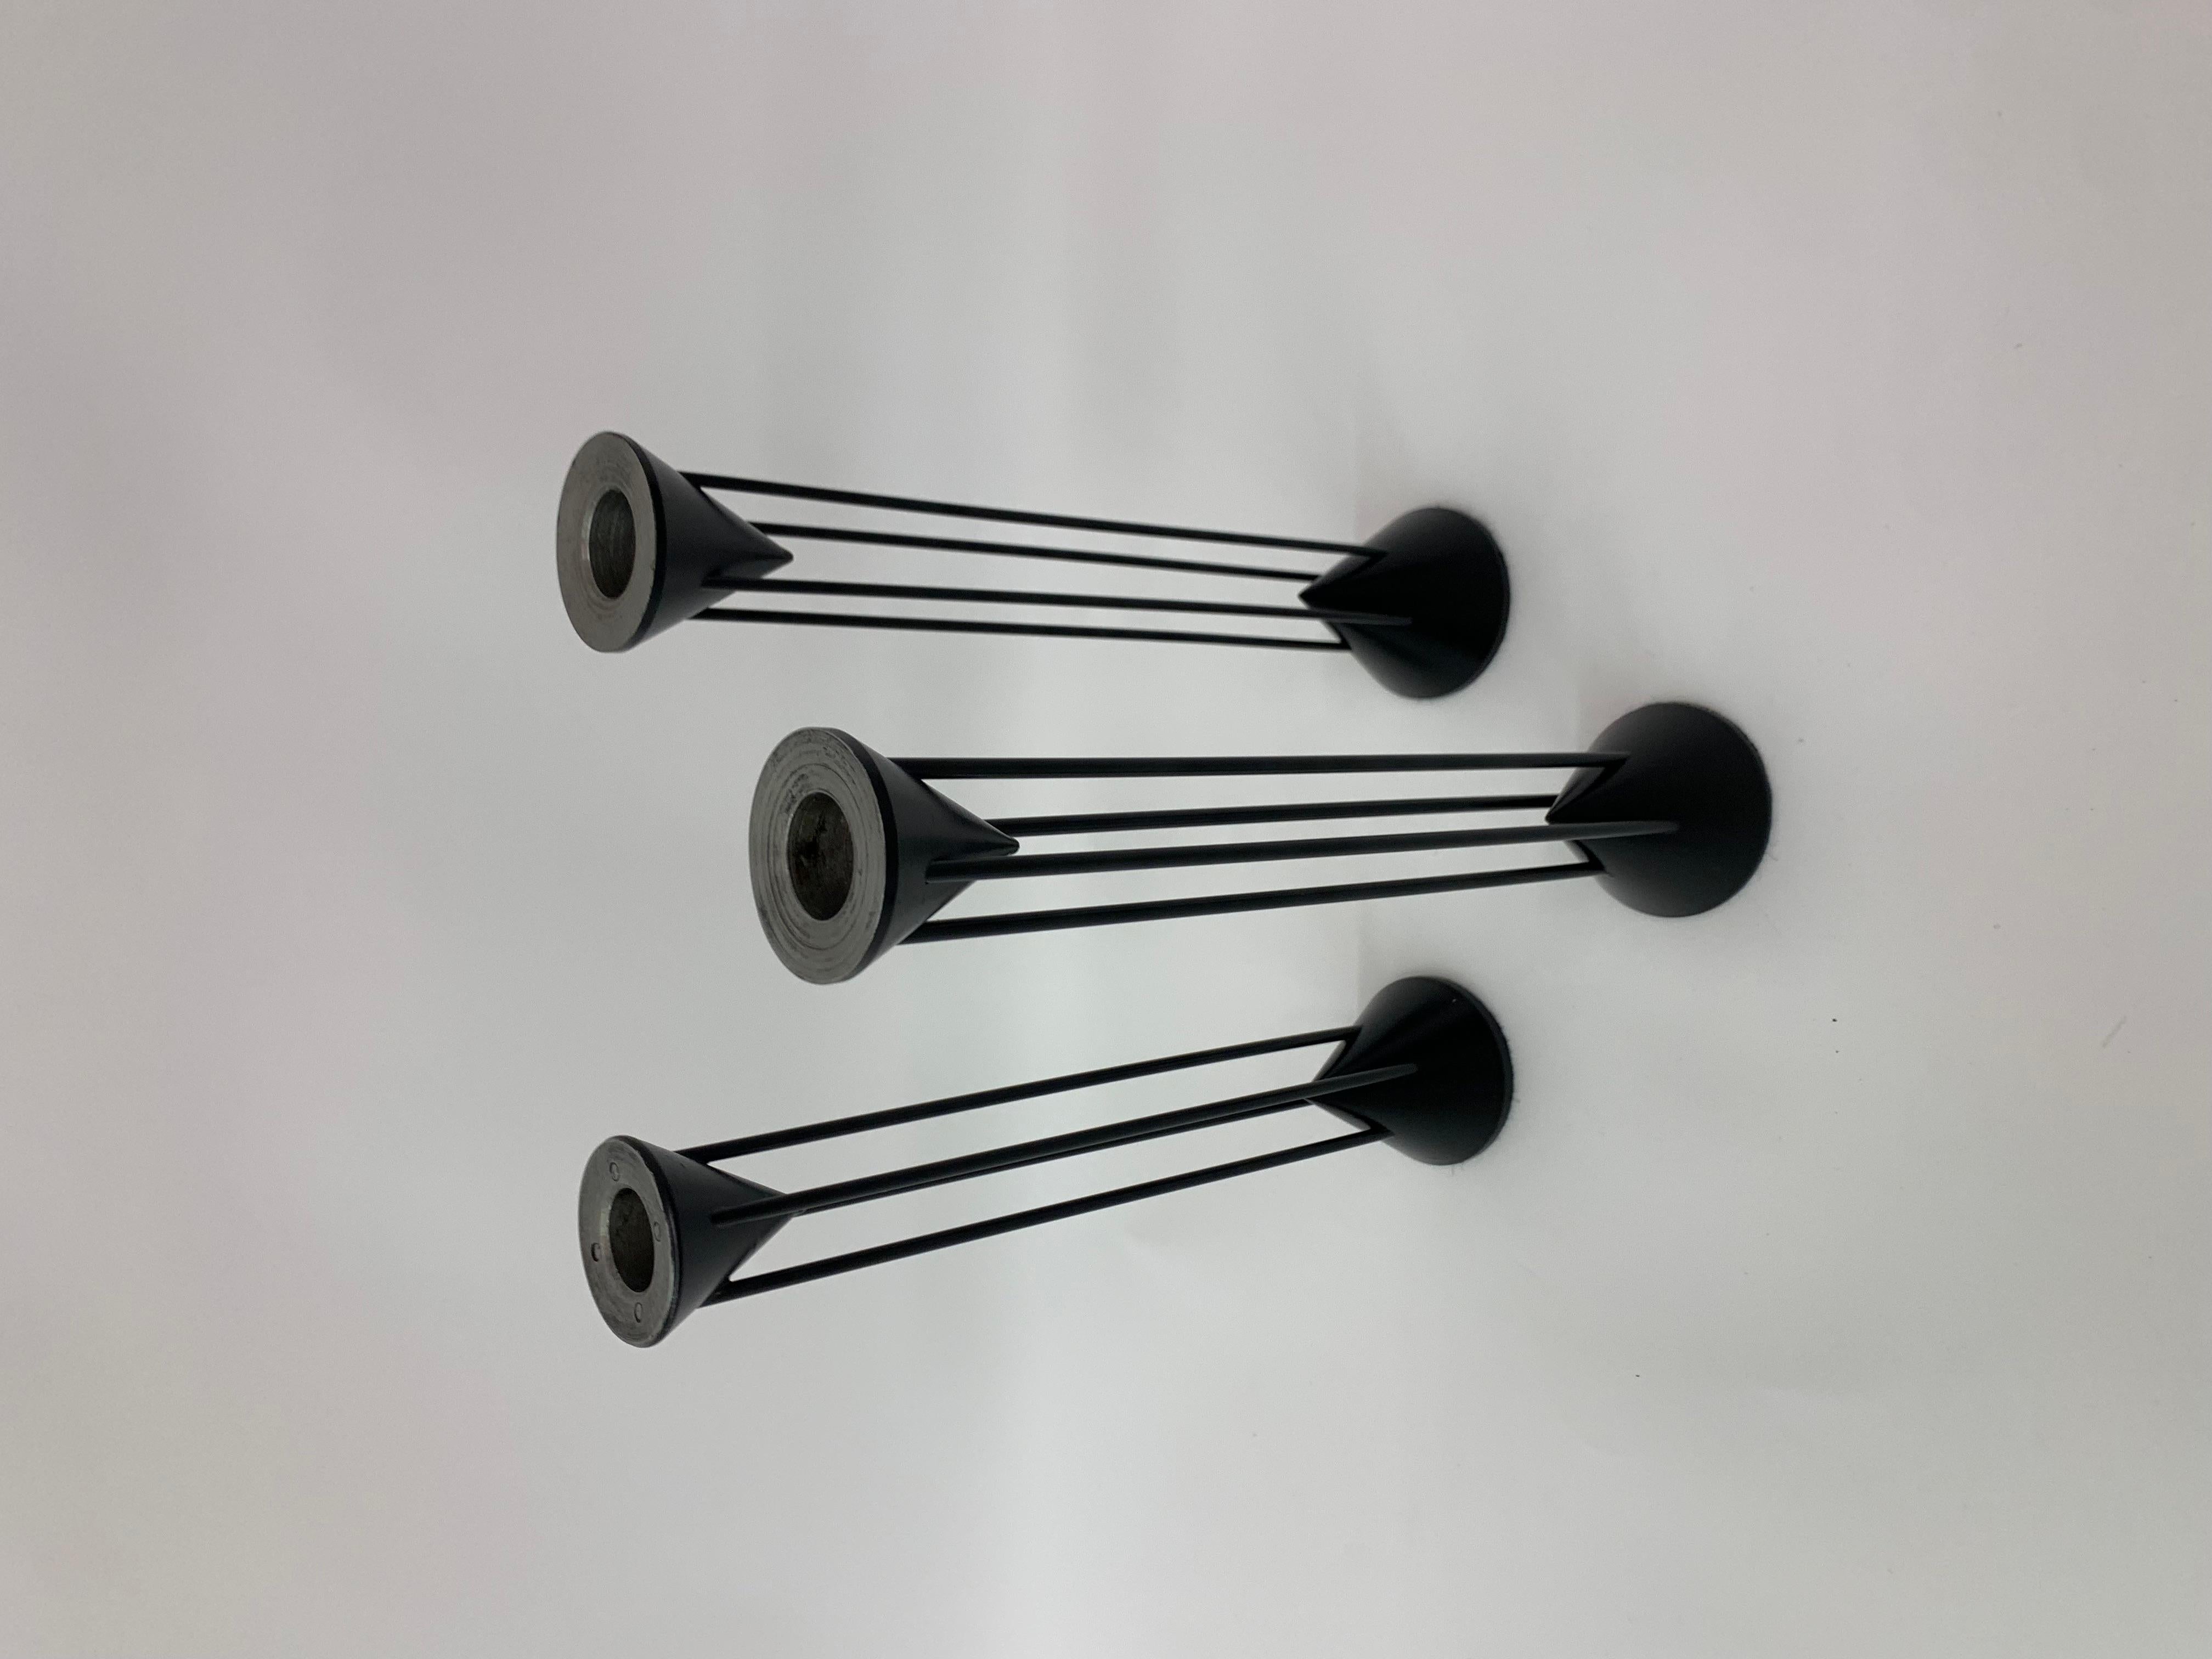 Metal Set of 3 Post-Modern Memphis Candle Sticks by Markus Borgens, 1980s For Sale